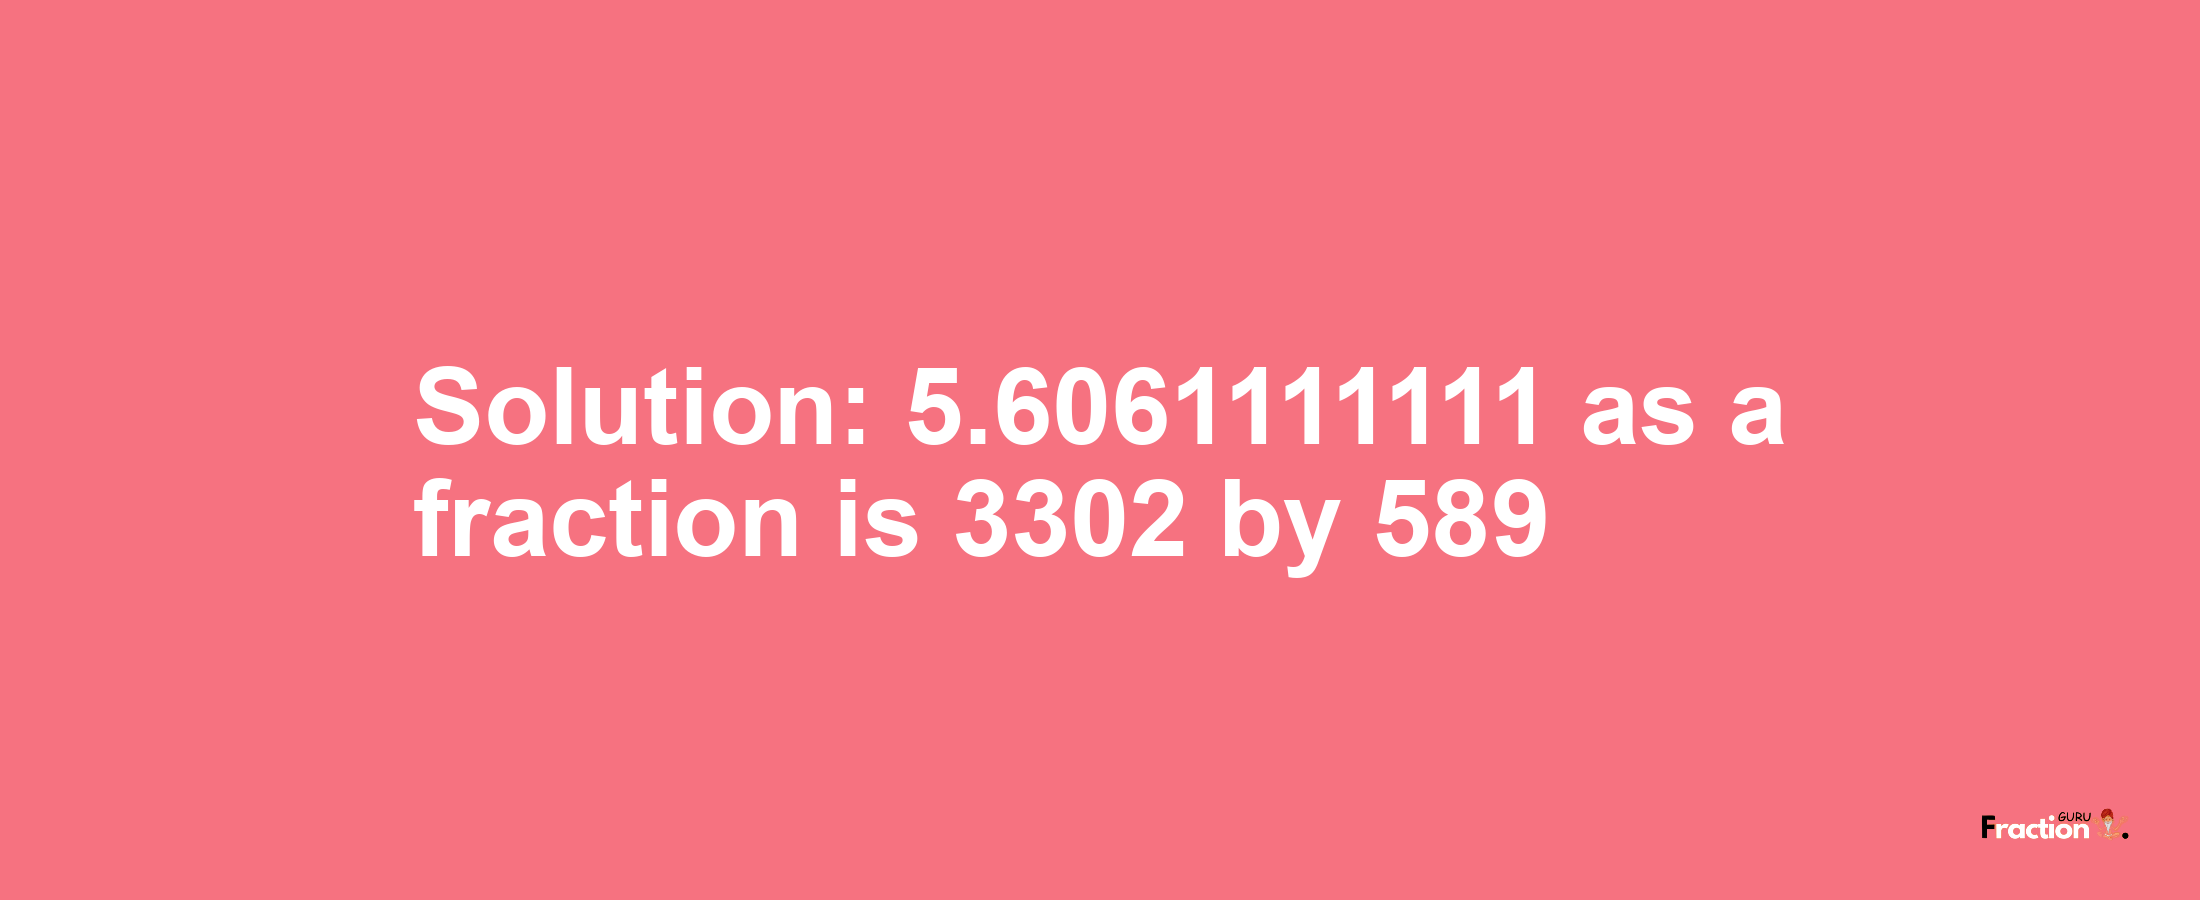 Solution:5.6061111111 as a fraction is 3302/589